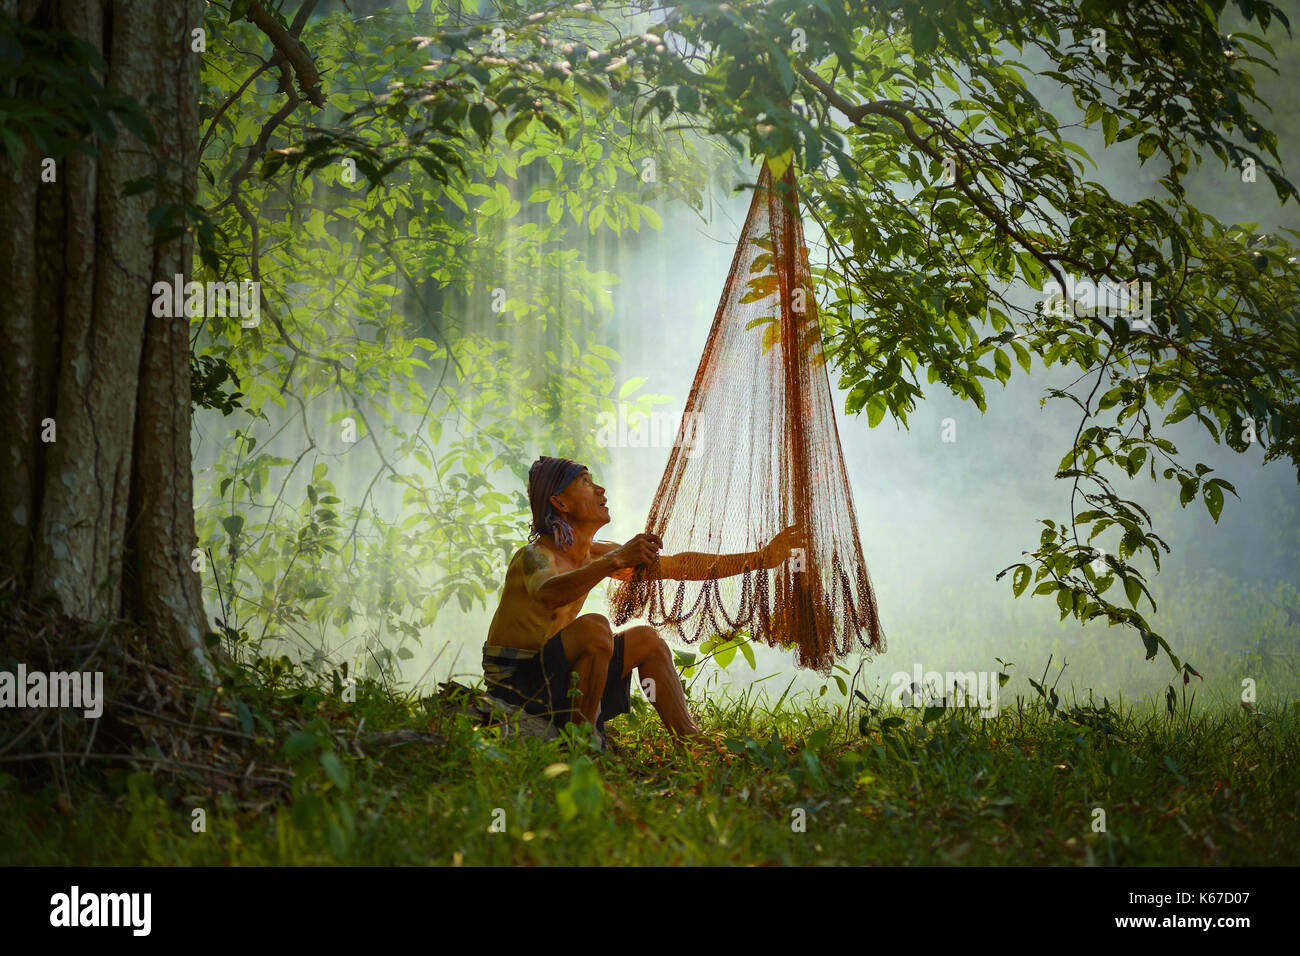 Fisherman sitting in forest inspecting fishing net, Thailand Stock Photo